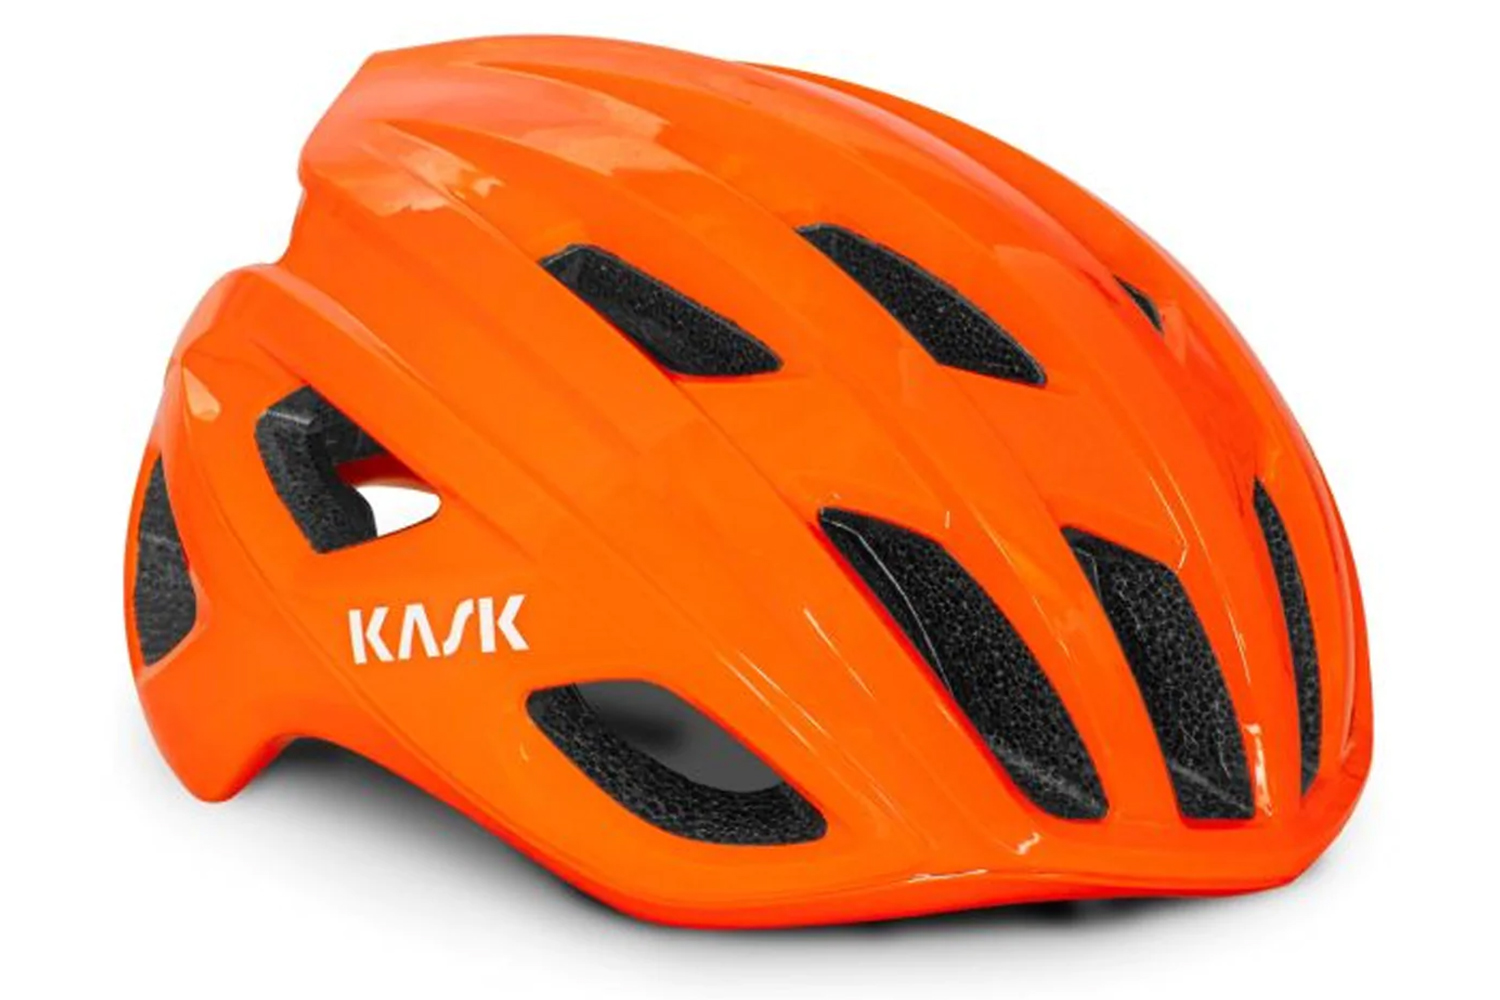  Велошлем Kask Mojito Cubed